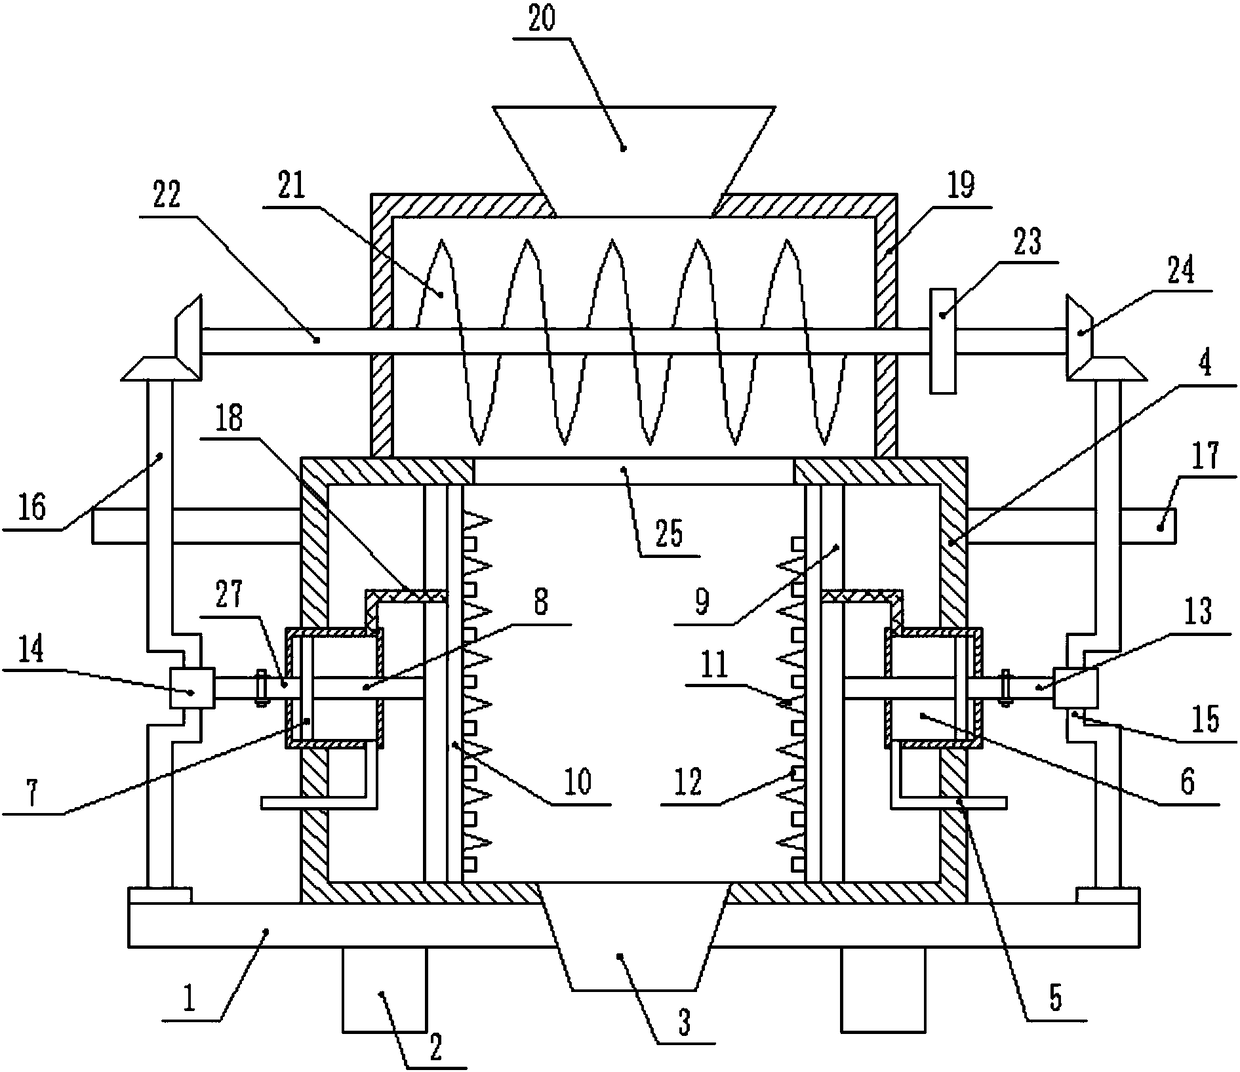 Crank type soil crushing and mixing device for heterotopic soil remediation and treatment